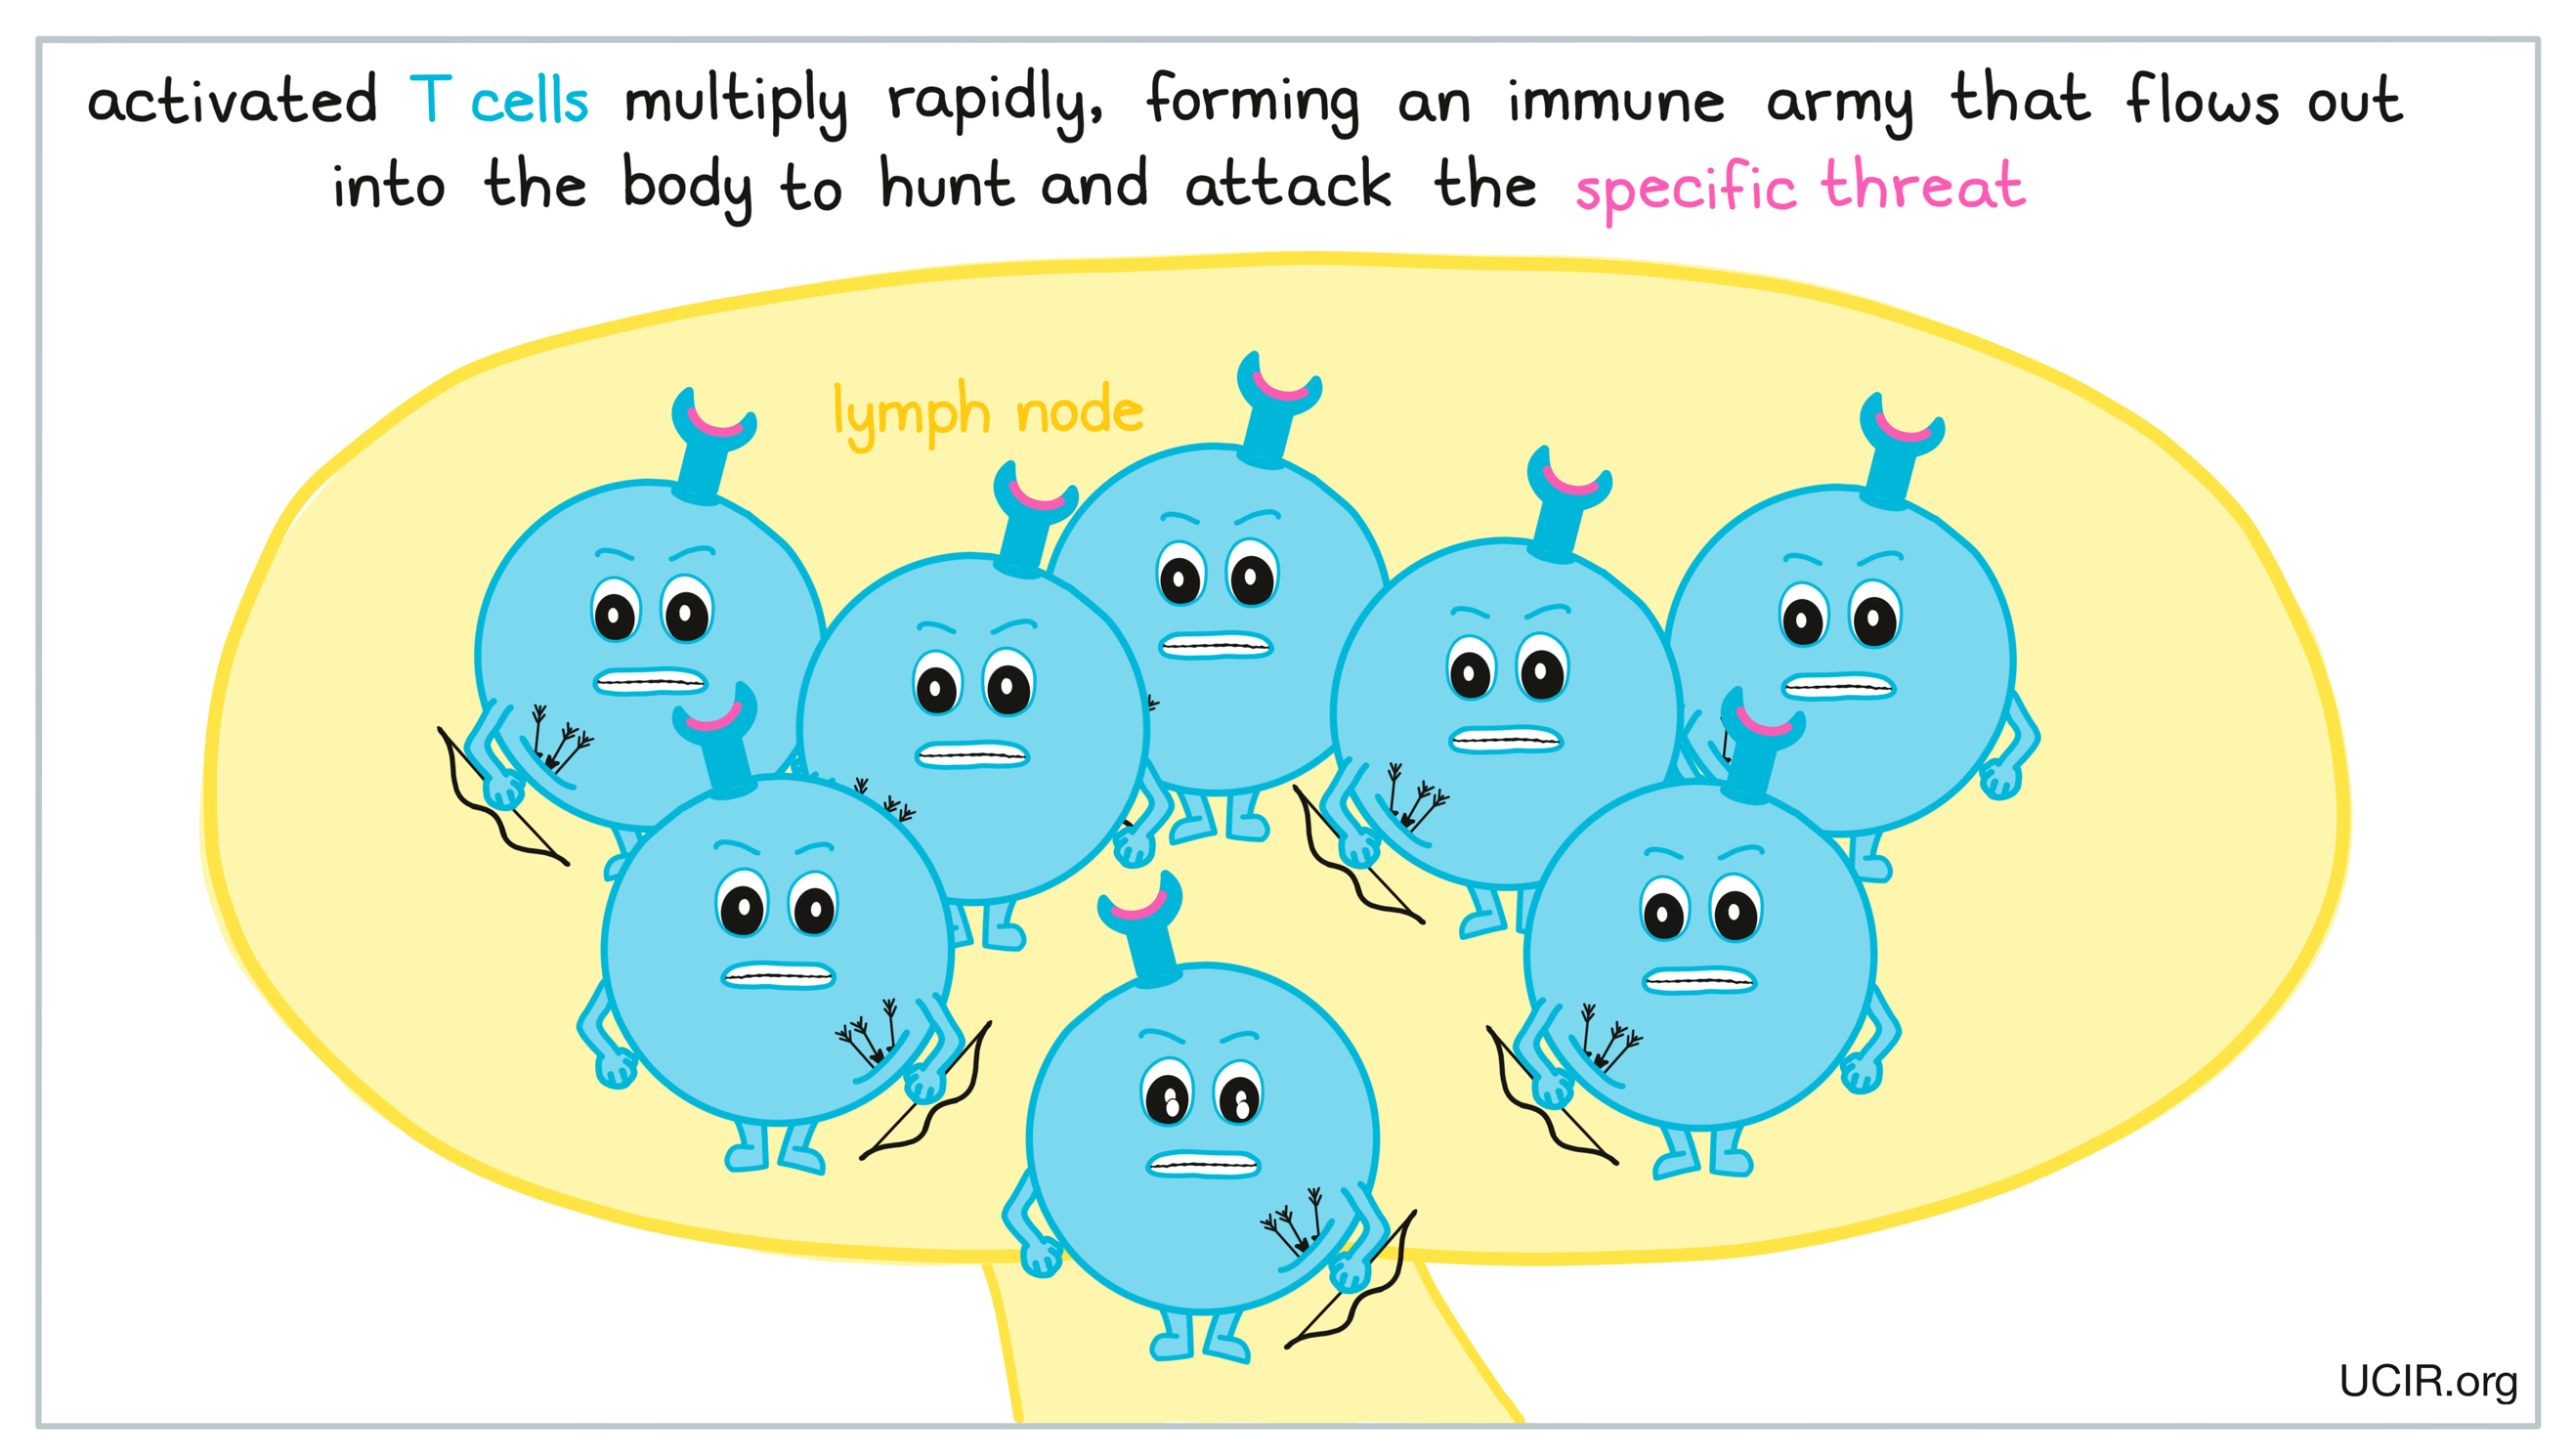 Army of T cells clones